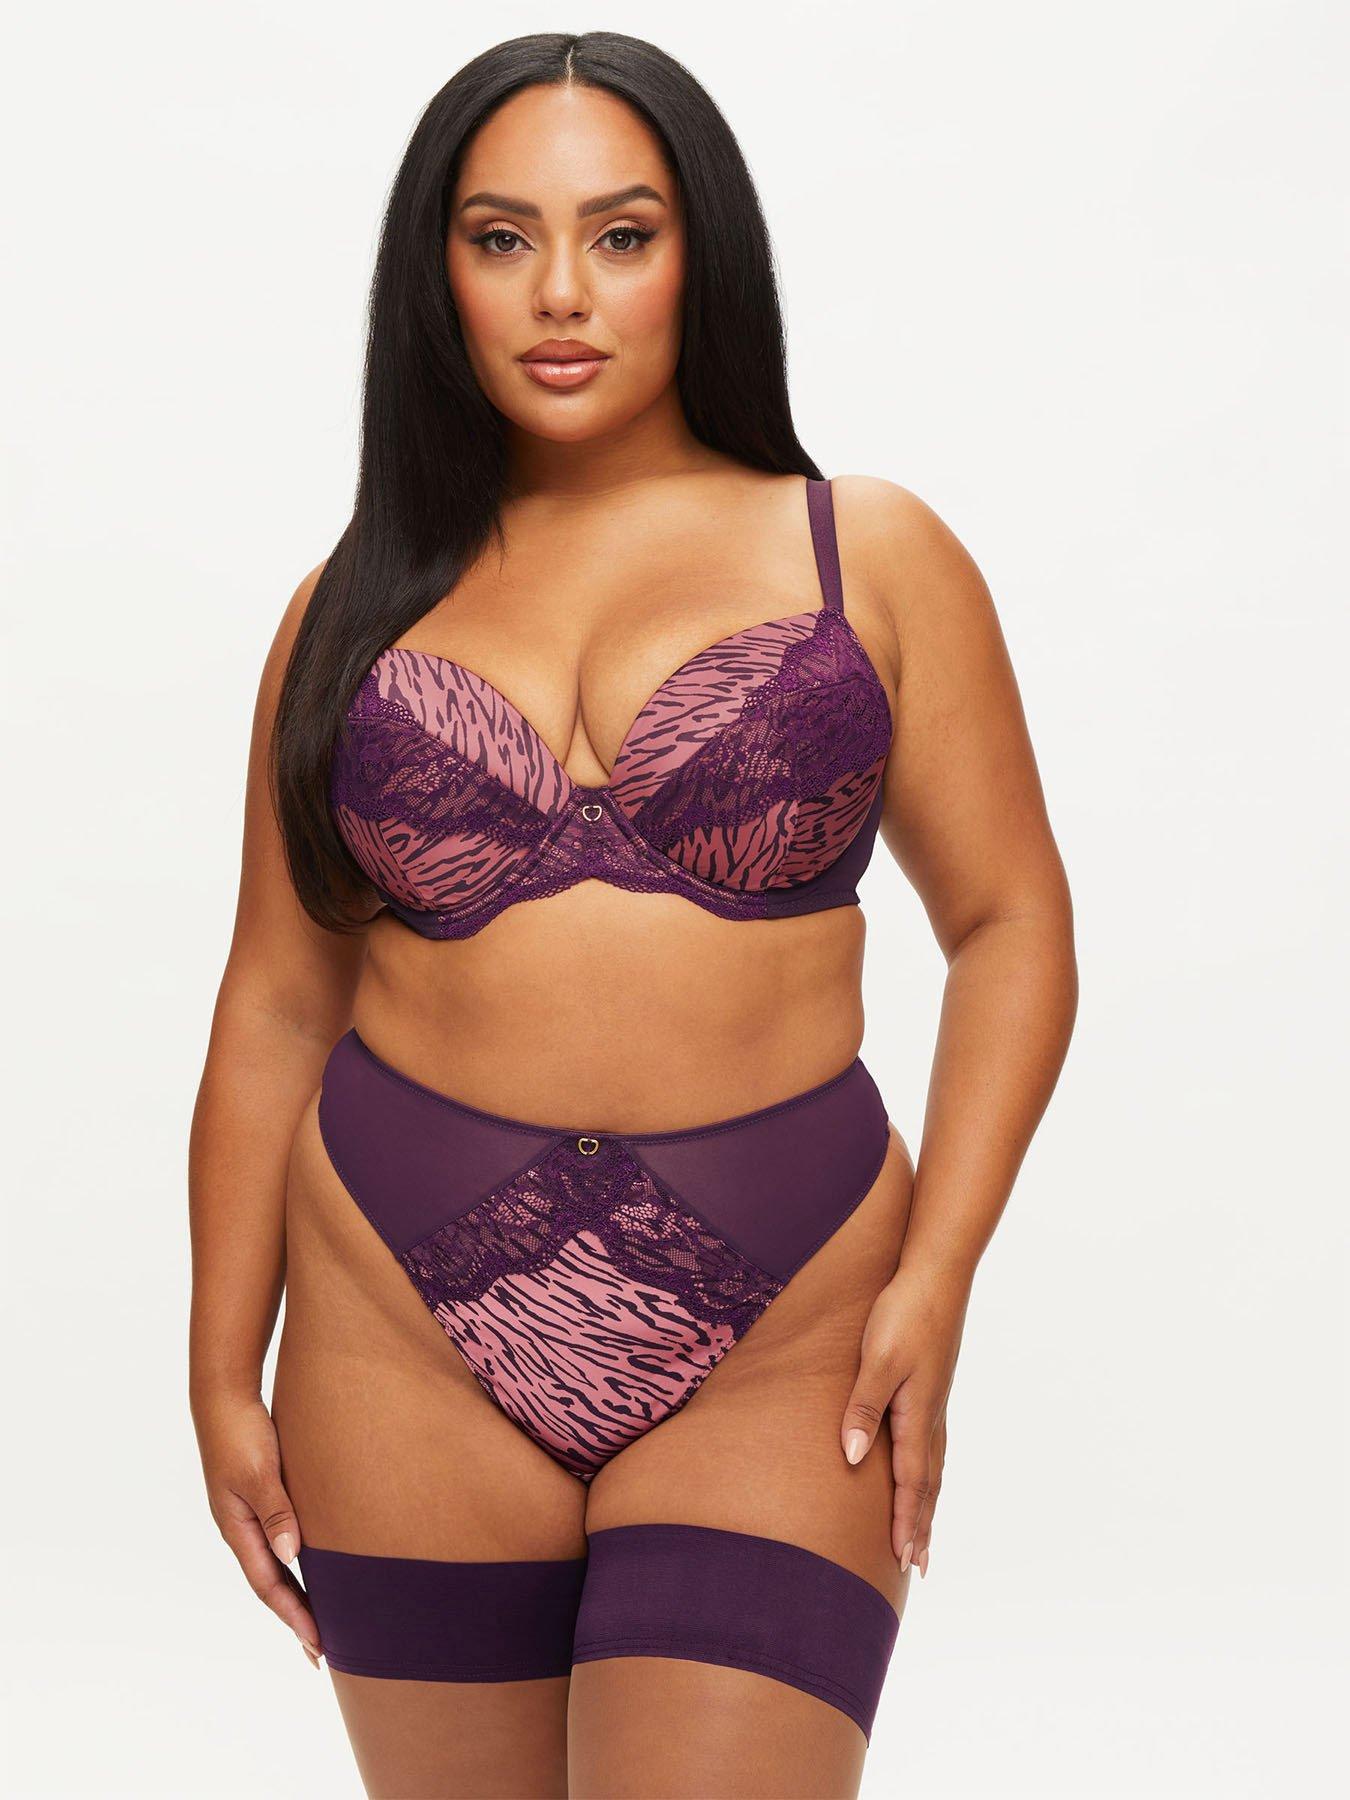 Ann Summers After Glow Fuller Bust Non Padded Plunge Bra - Sizes 32-44,  DD-H